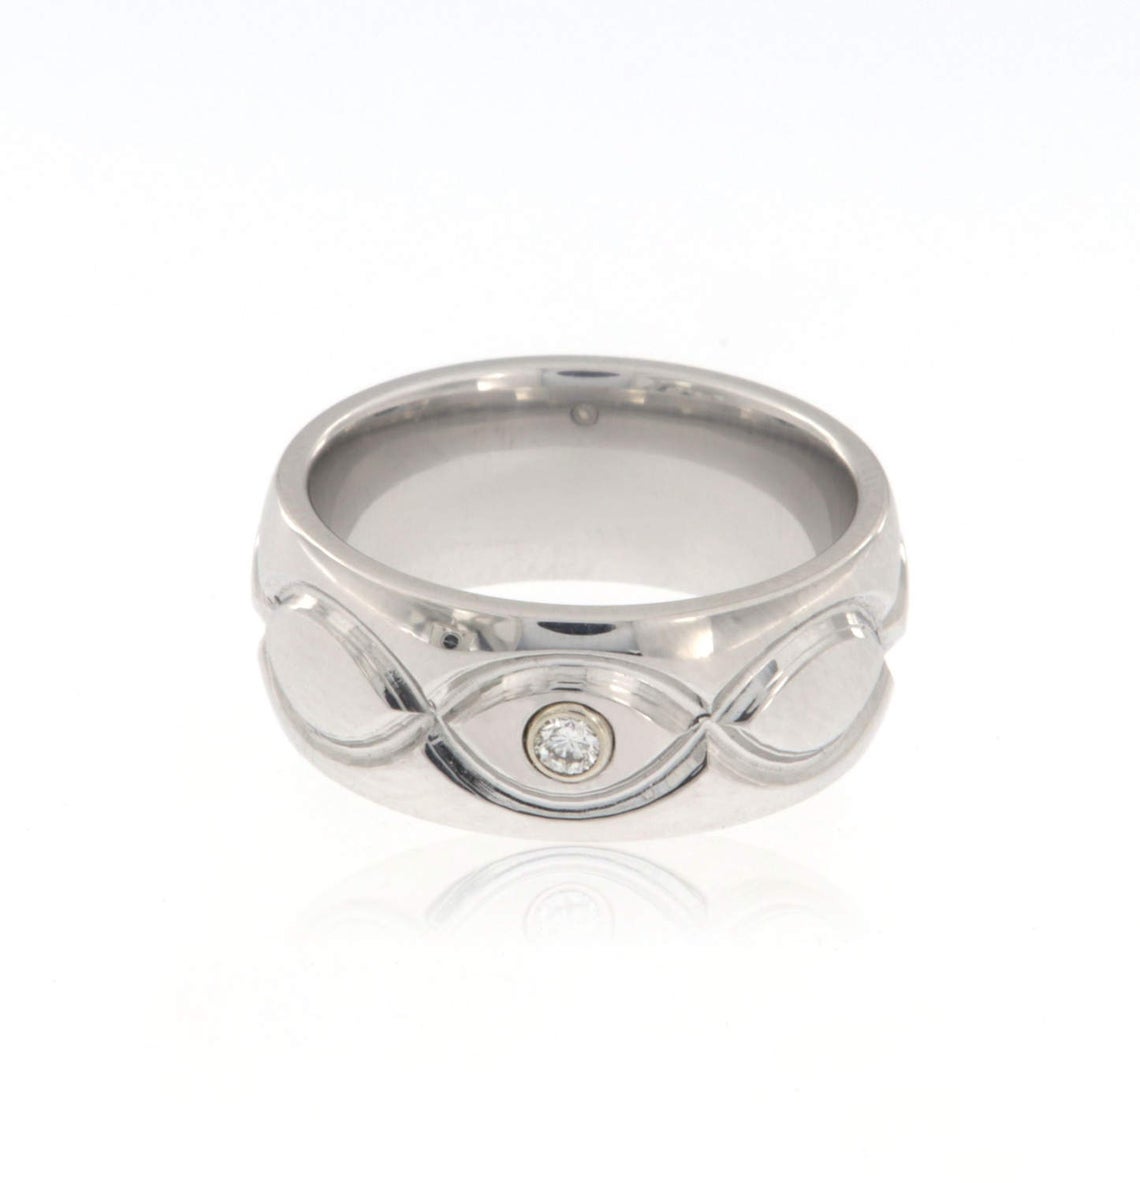 8mm wide cobalt ring with an infinity design and bezel set diamond